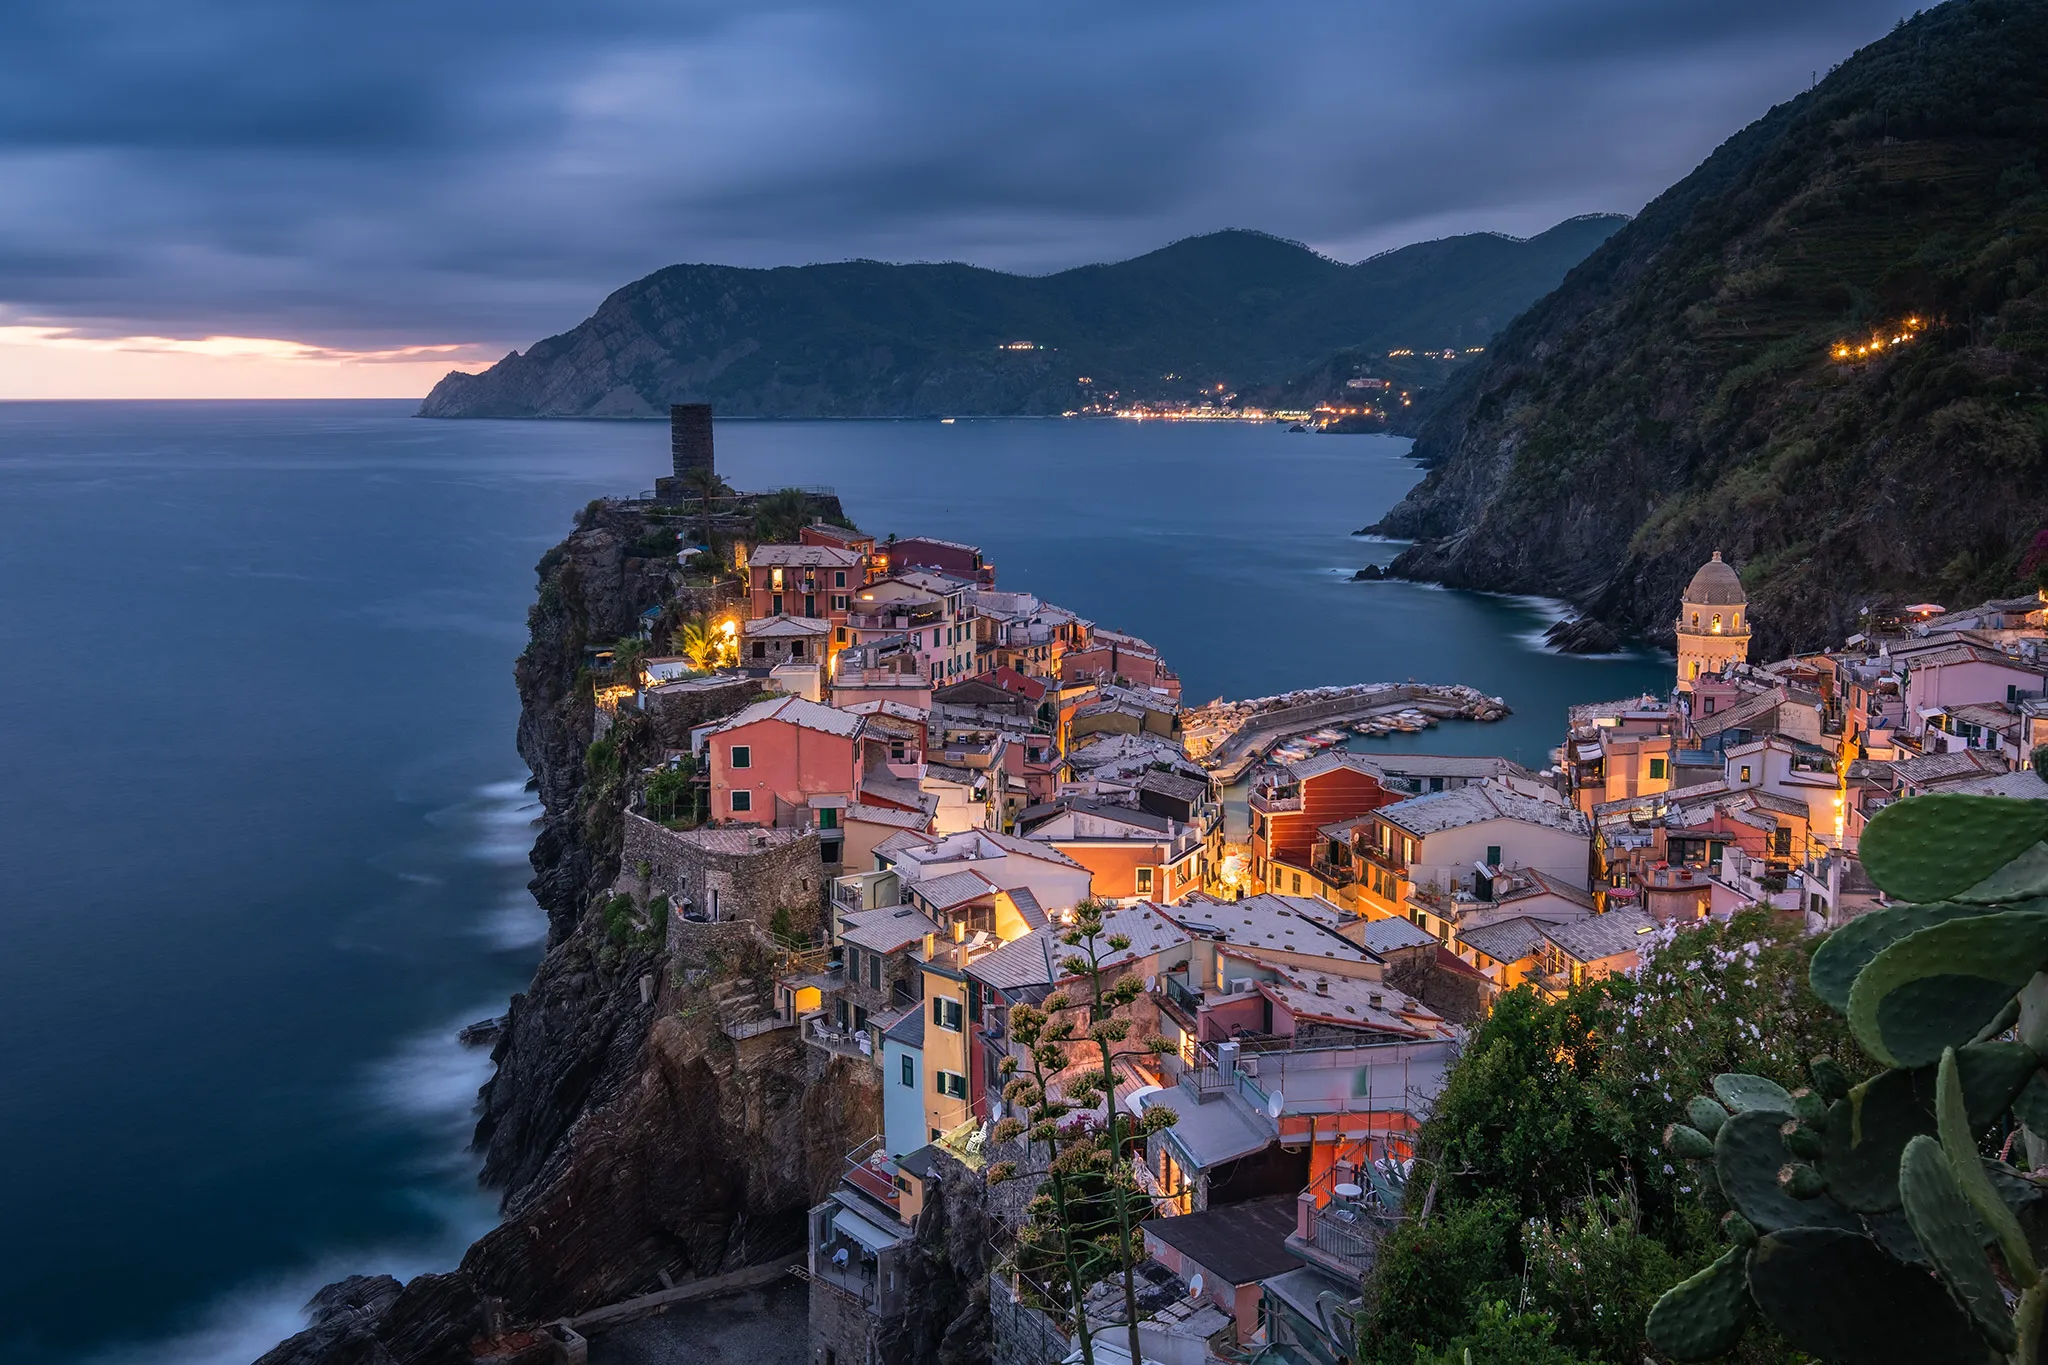 Another classic view of Vernazza at blue hour when the town is starting to light up